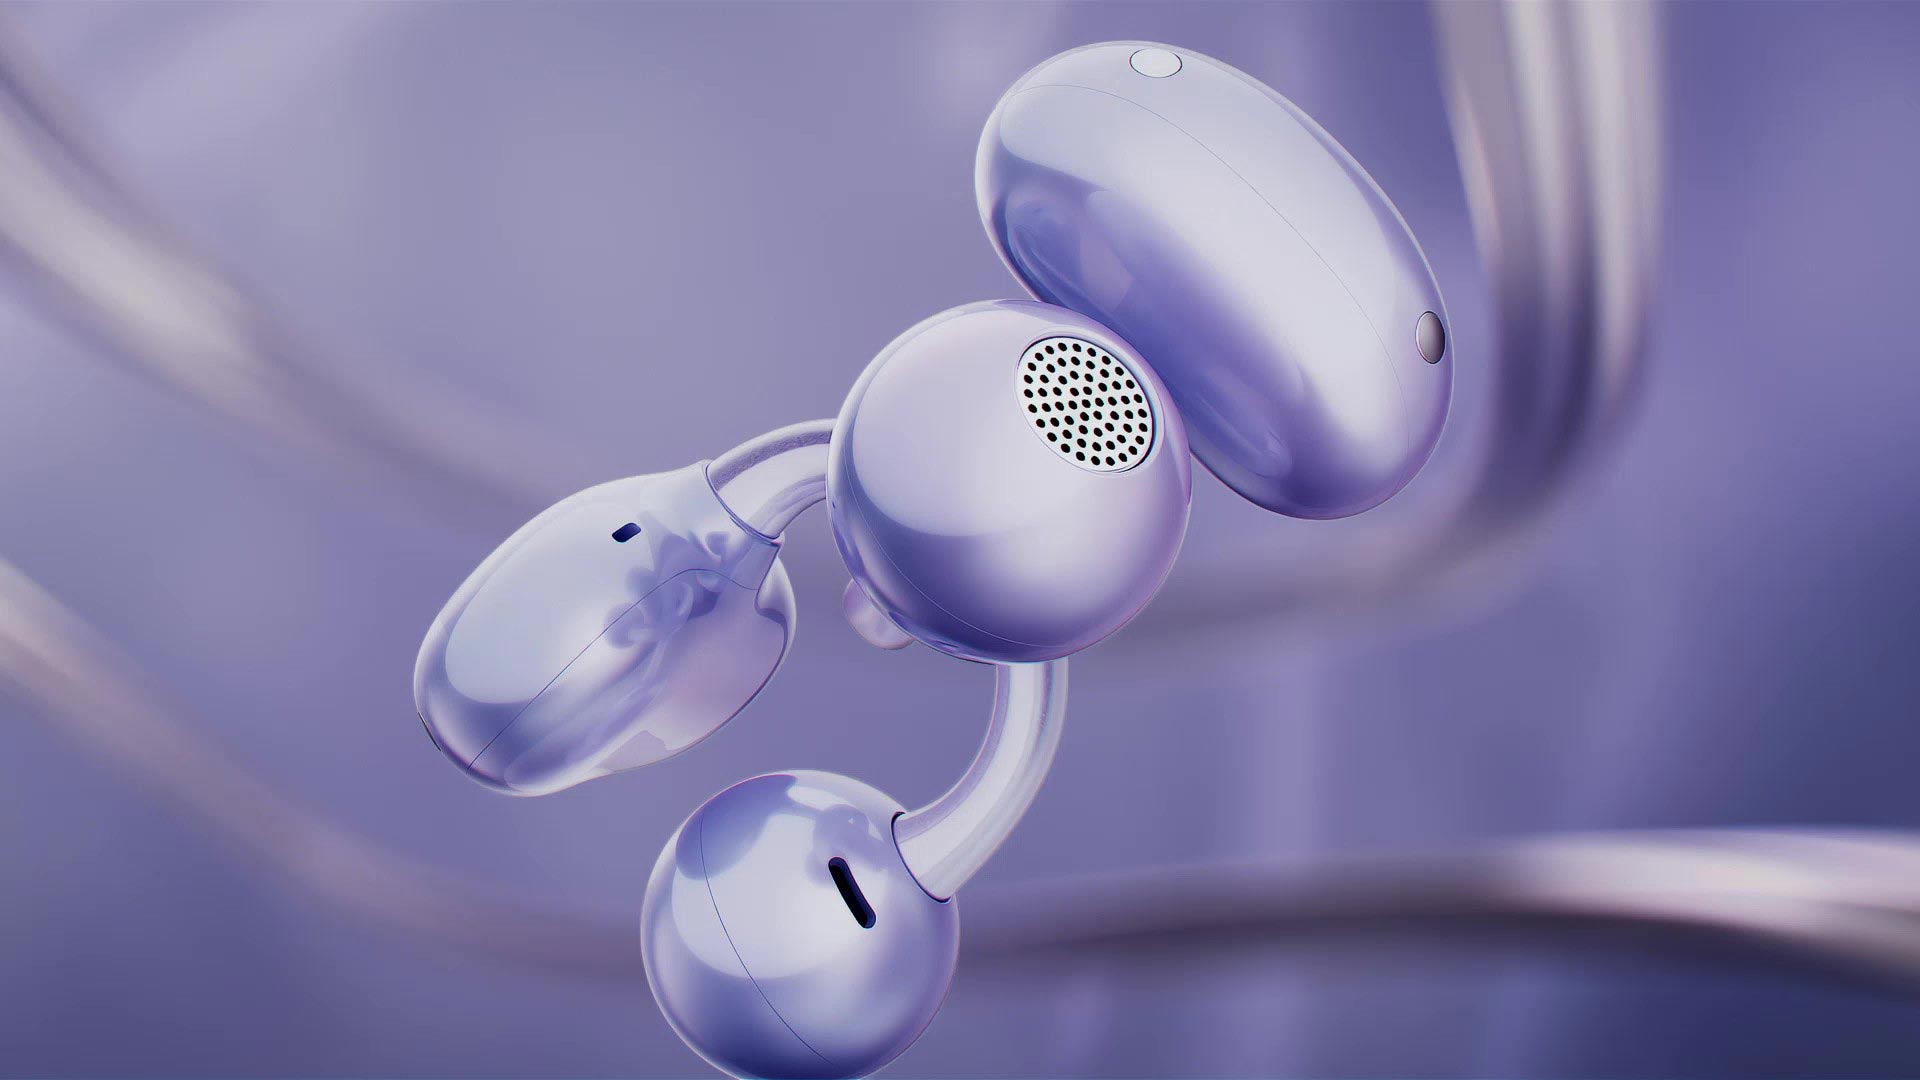 The HUAWEI FreeClip: The Open Ear Earbuds that Combine Style and